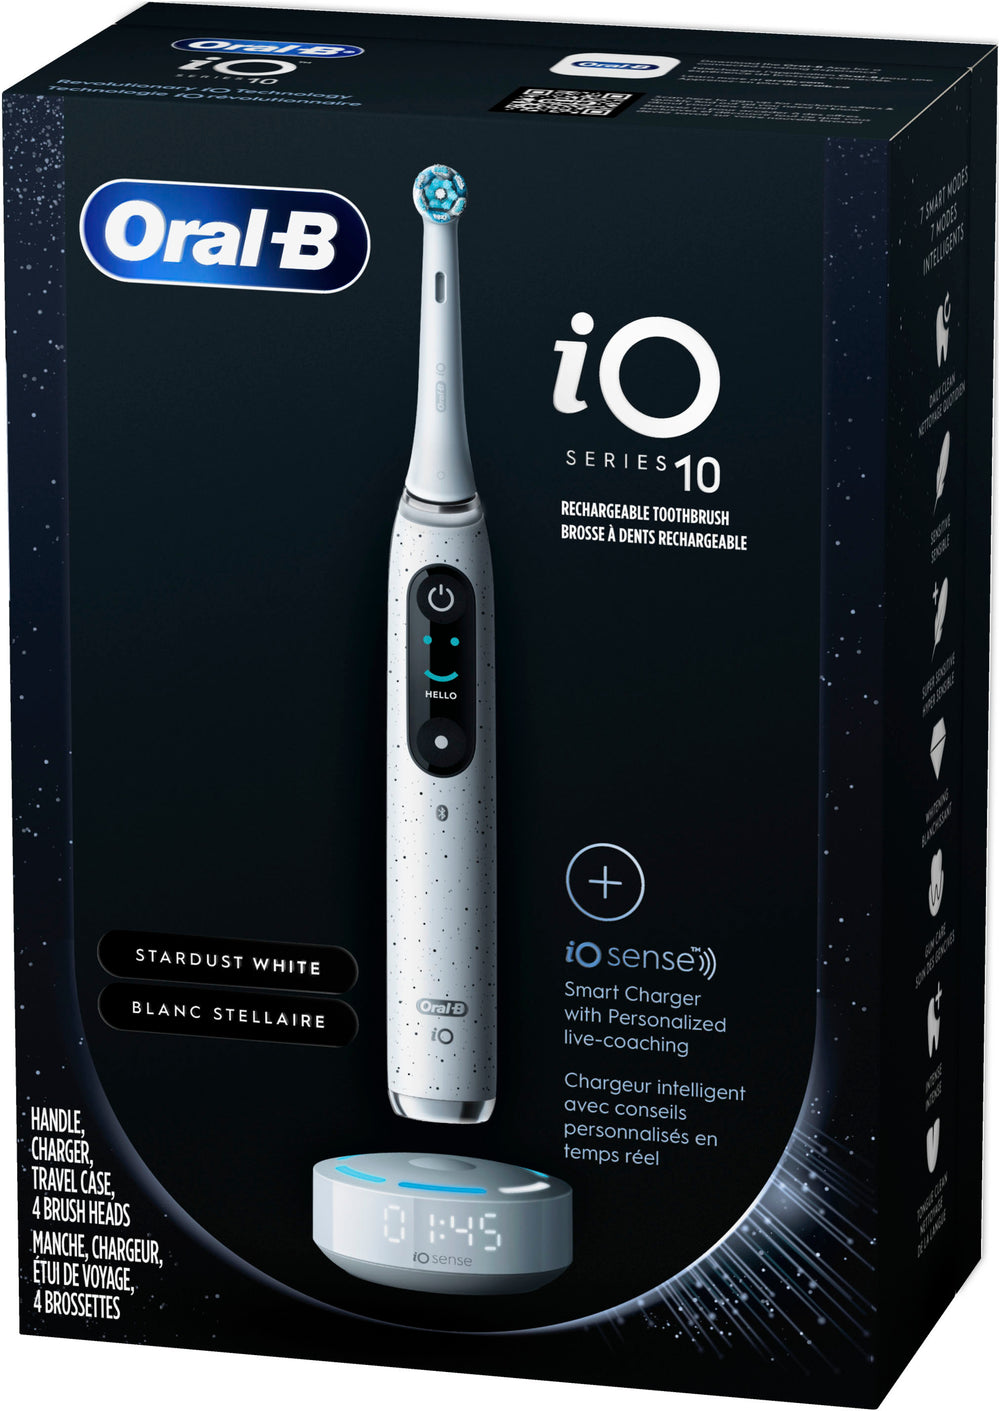 Oral-B - iO Series 10 Rechargeable Electric Toothbrush - White_1